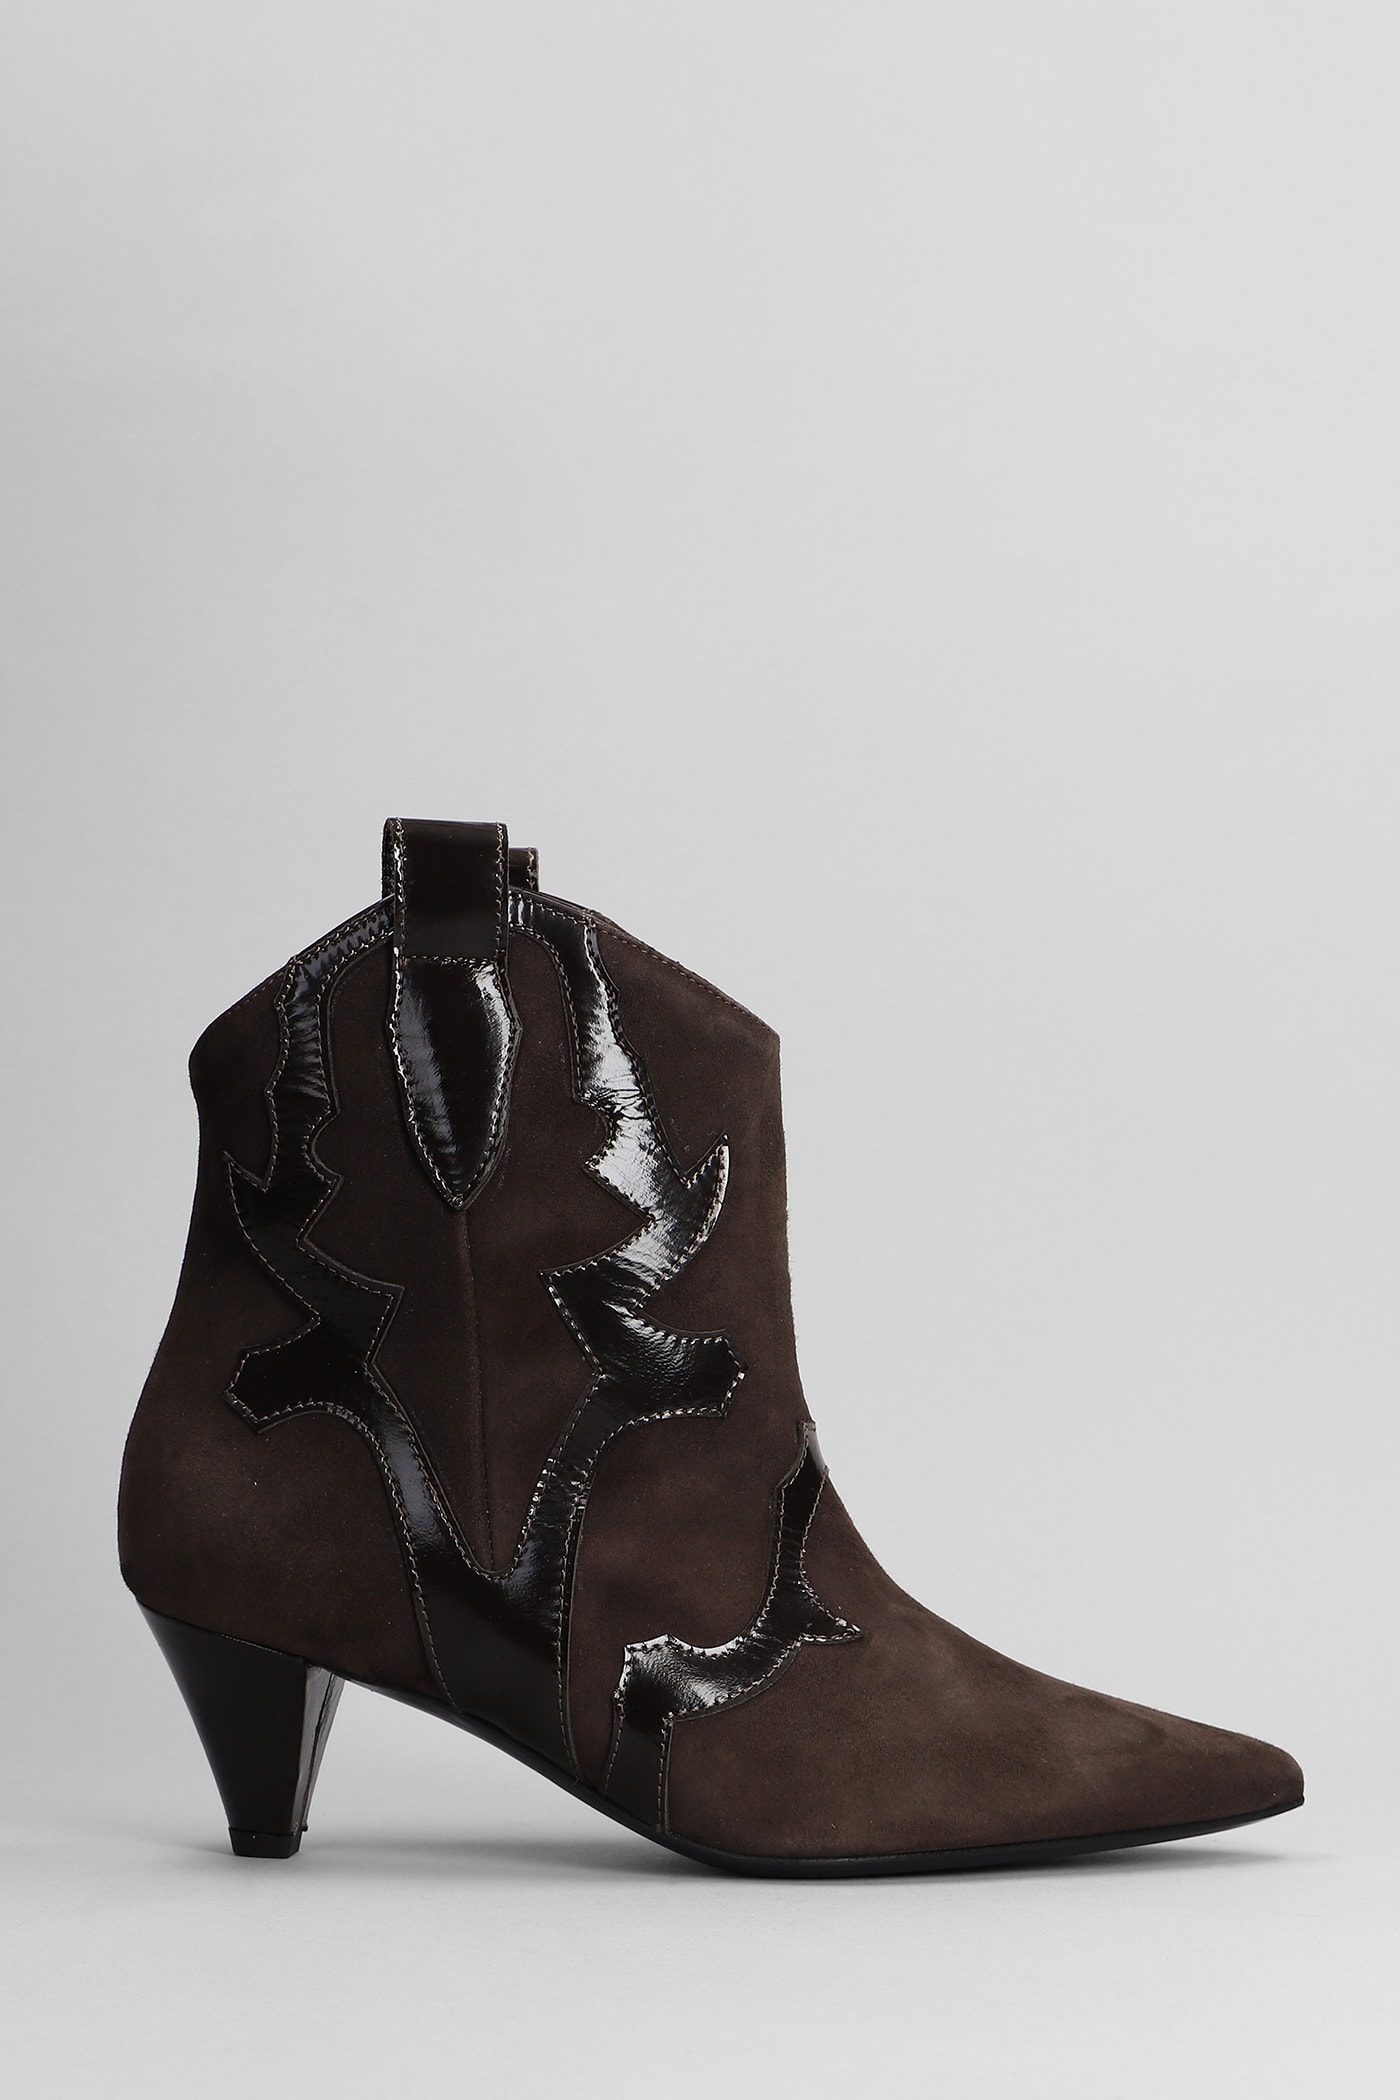 Texan Ankle Boots In Brown Suede